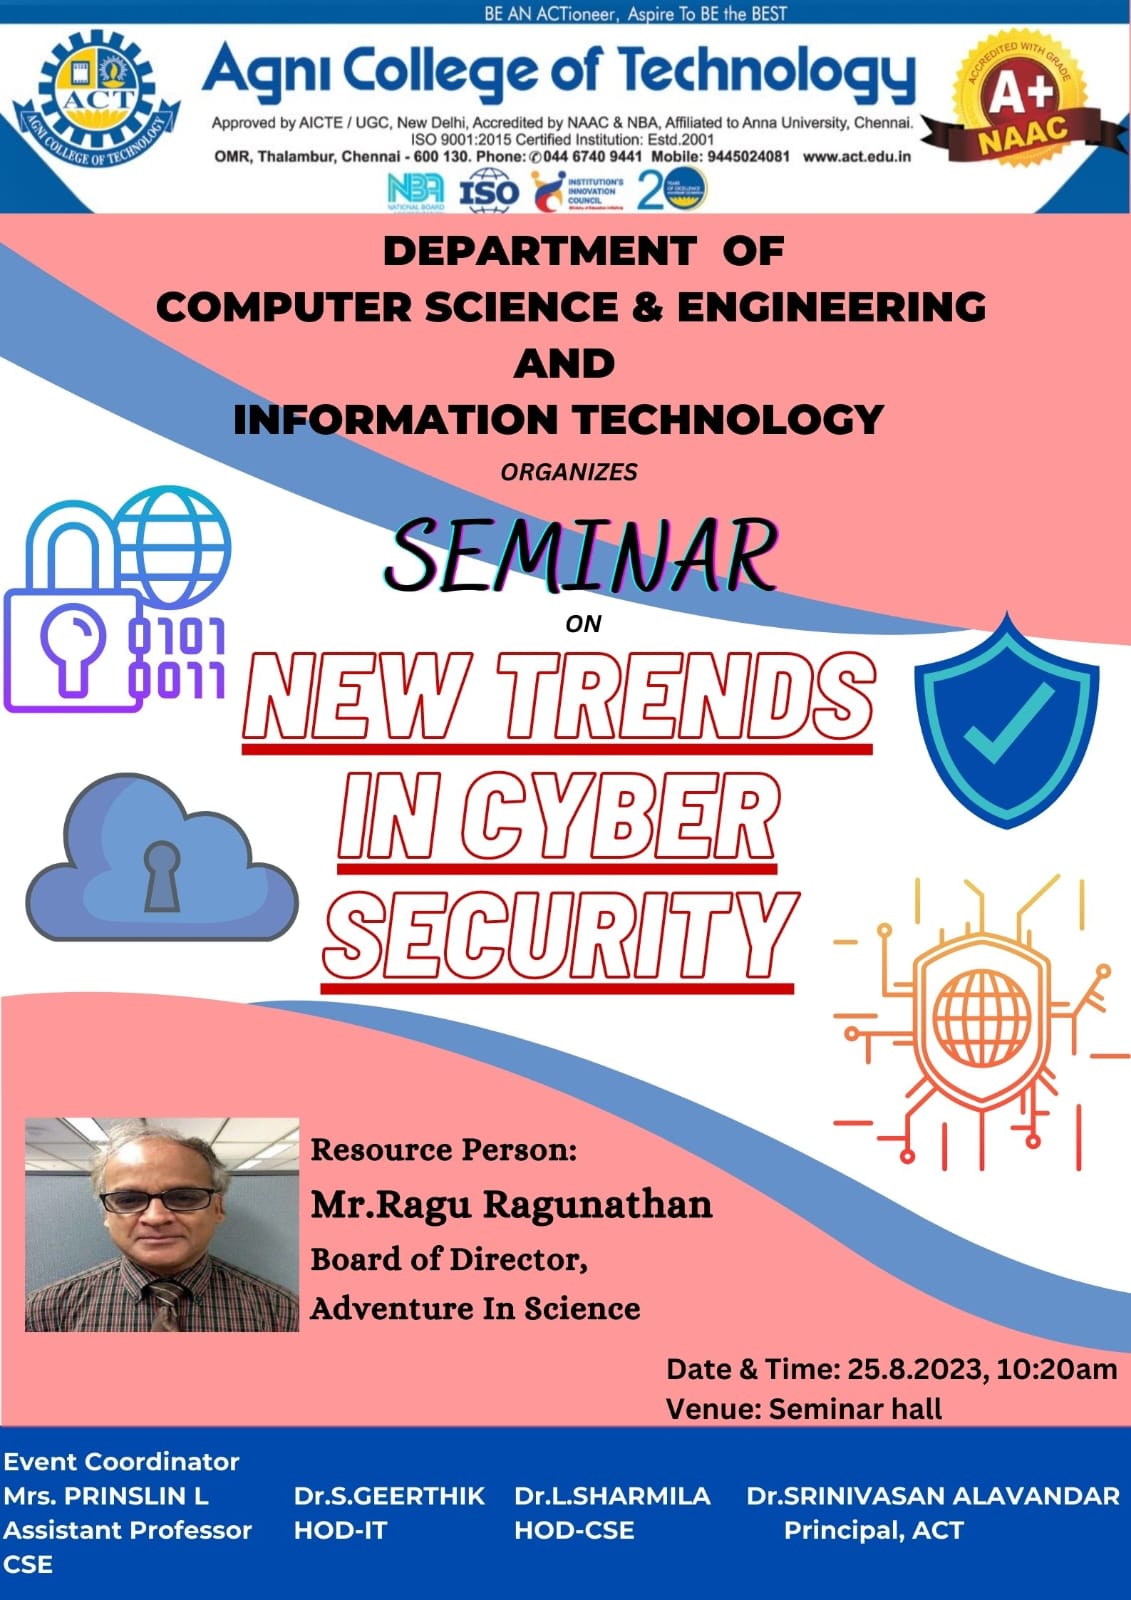 Seminar on New Trends in Cyber Security